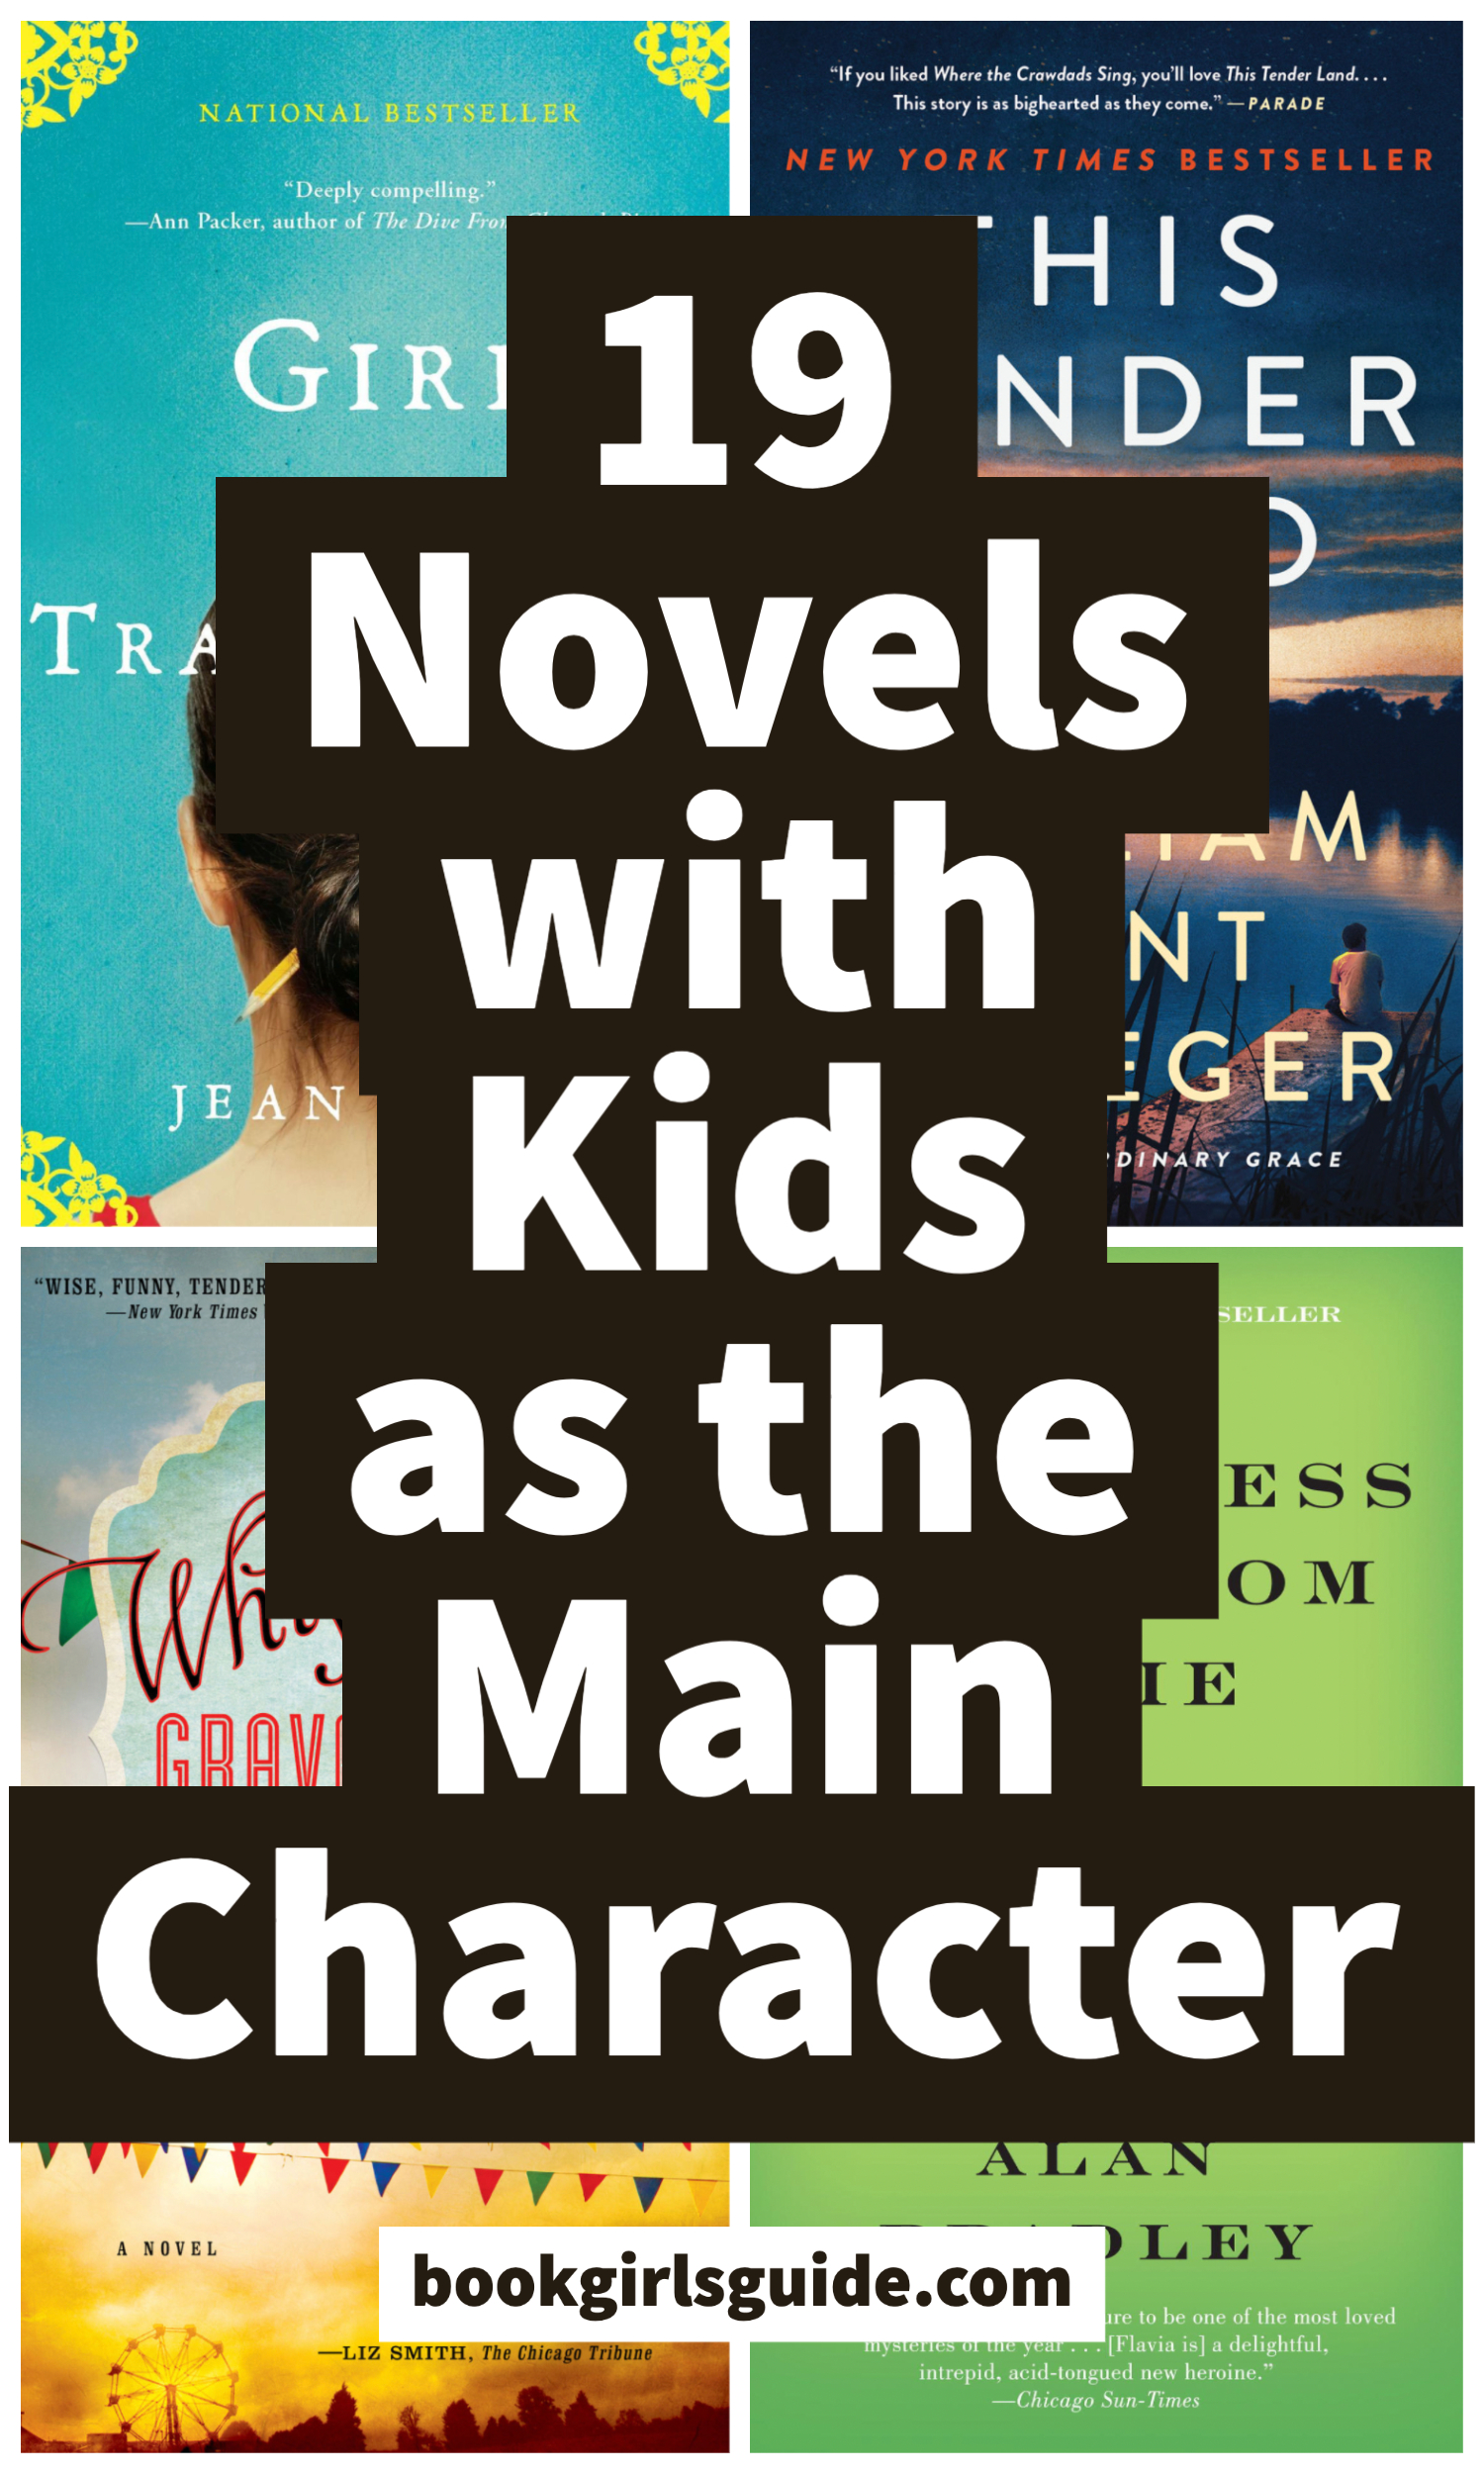 Text over images of book covers - 19 Novels with Kids as the Main Character